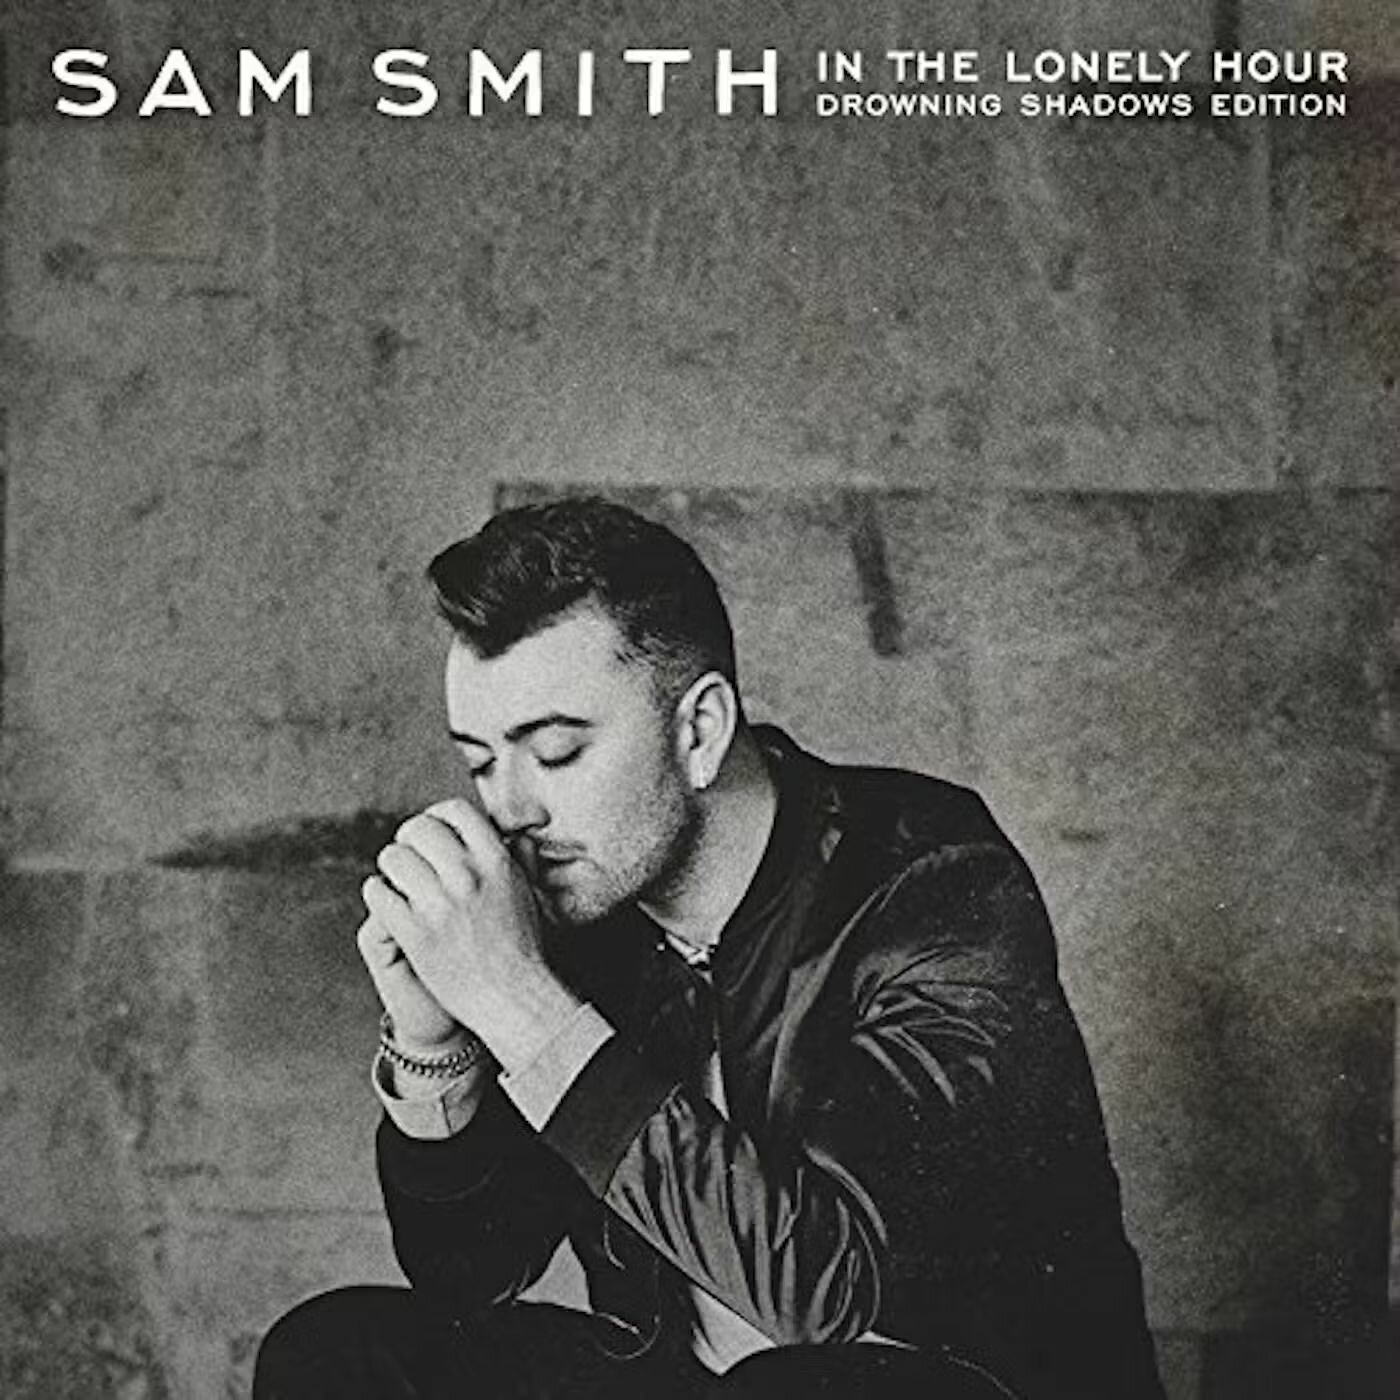 Винил 12" (LP), Special Edition Sam Smith In The Lonely Hour: Drowning Shadows Edition